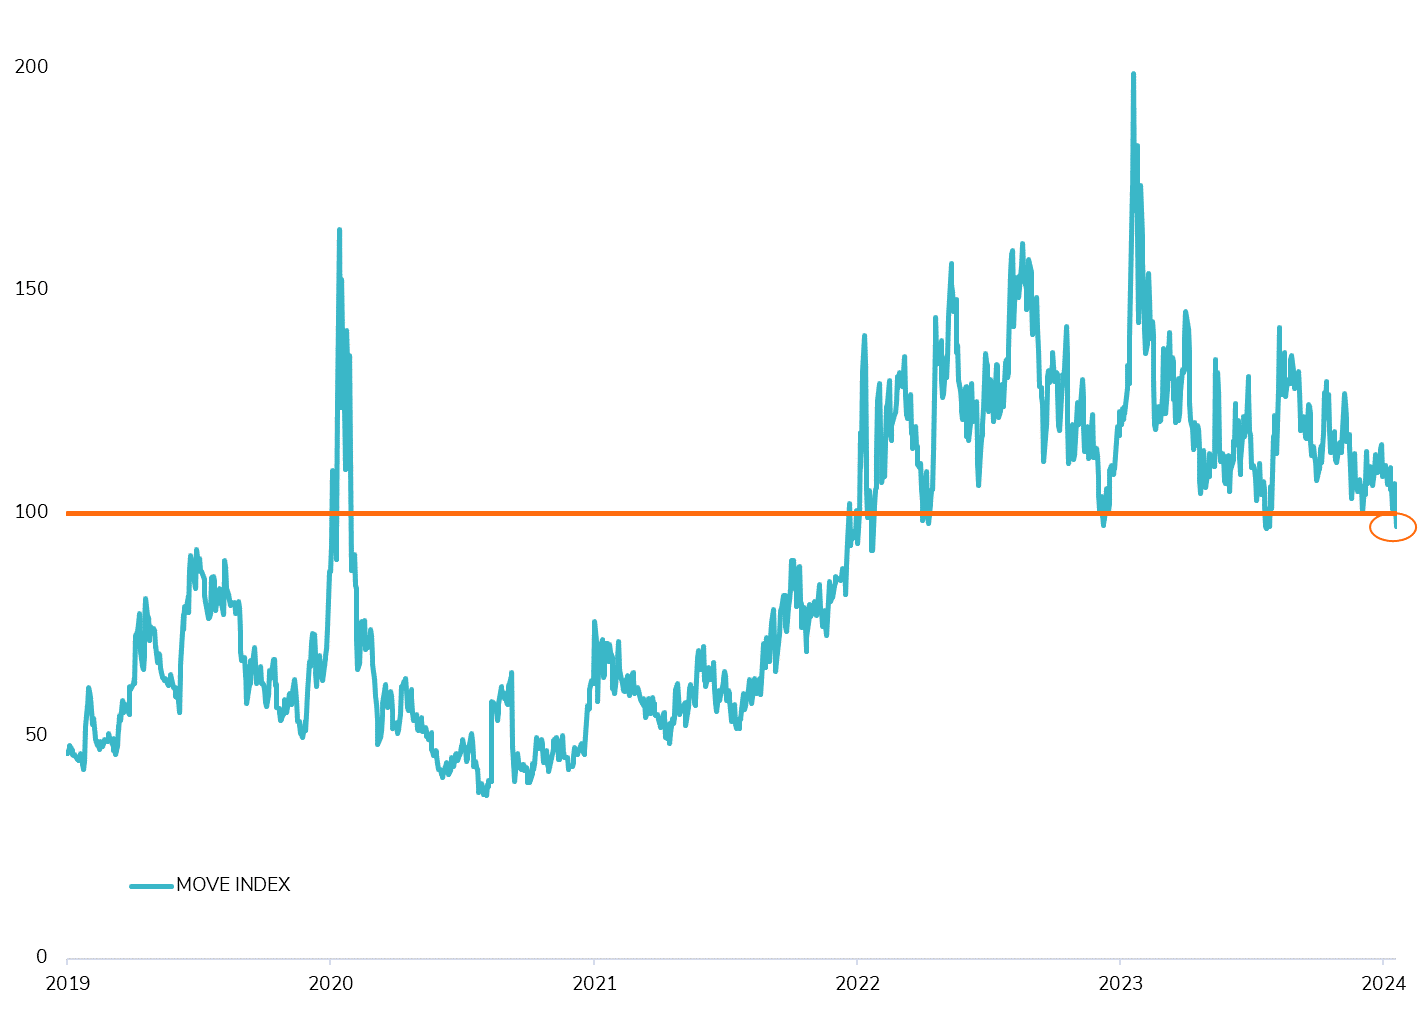 Interest Rate Volatility Drops Below 100 for the First Time in 6 Months!